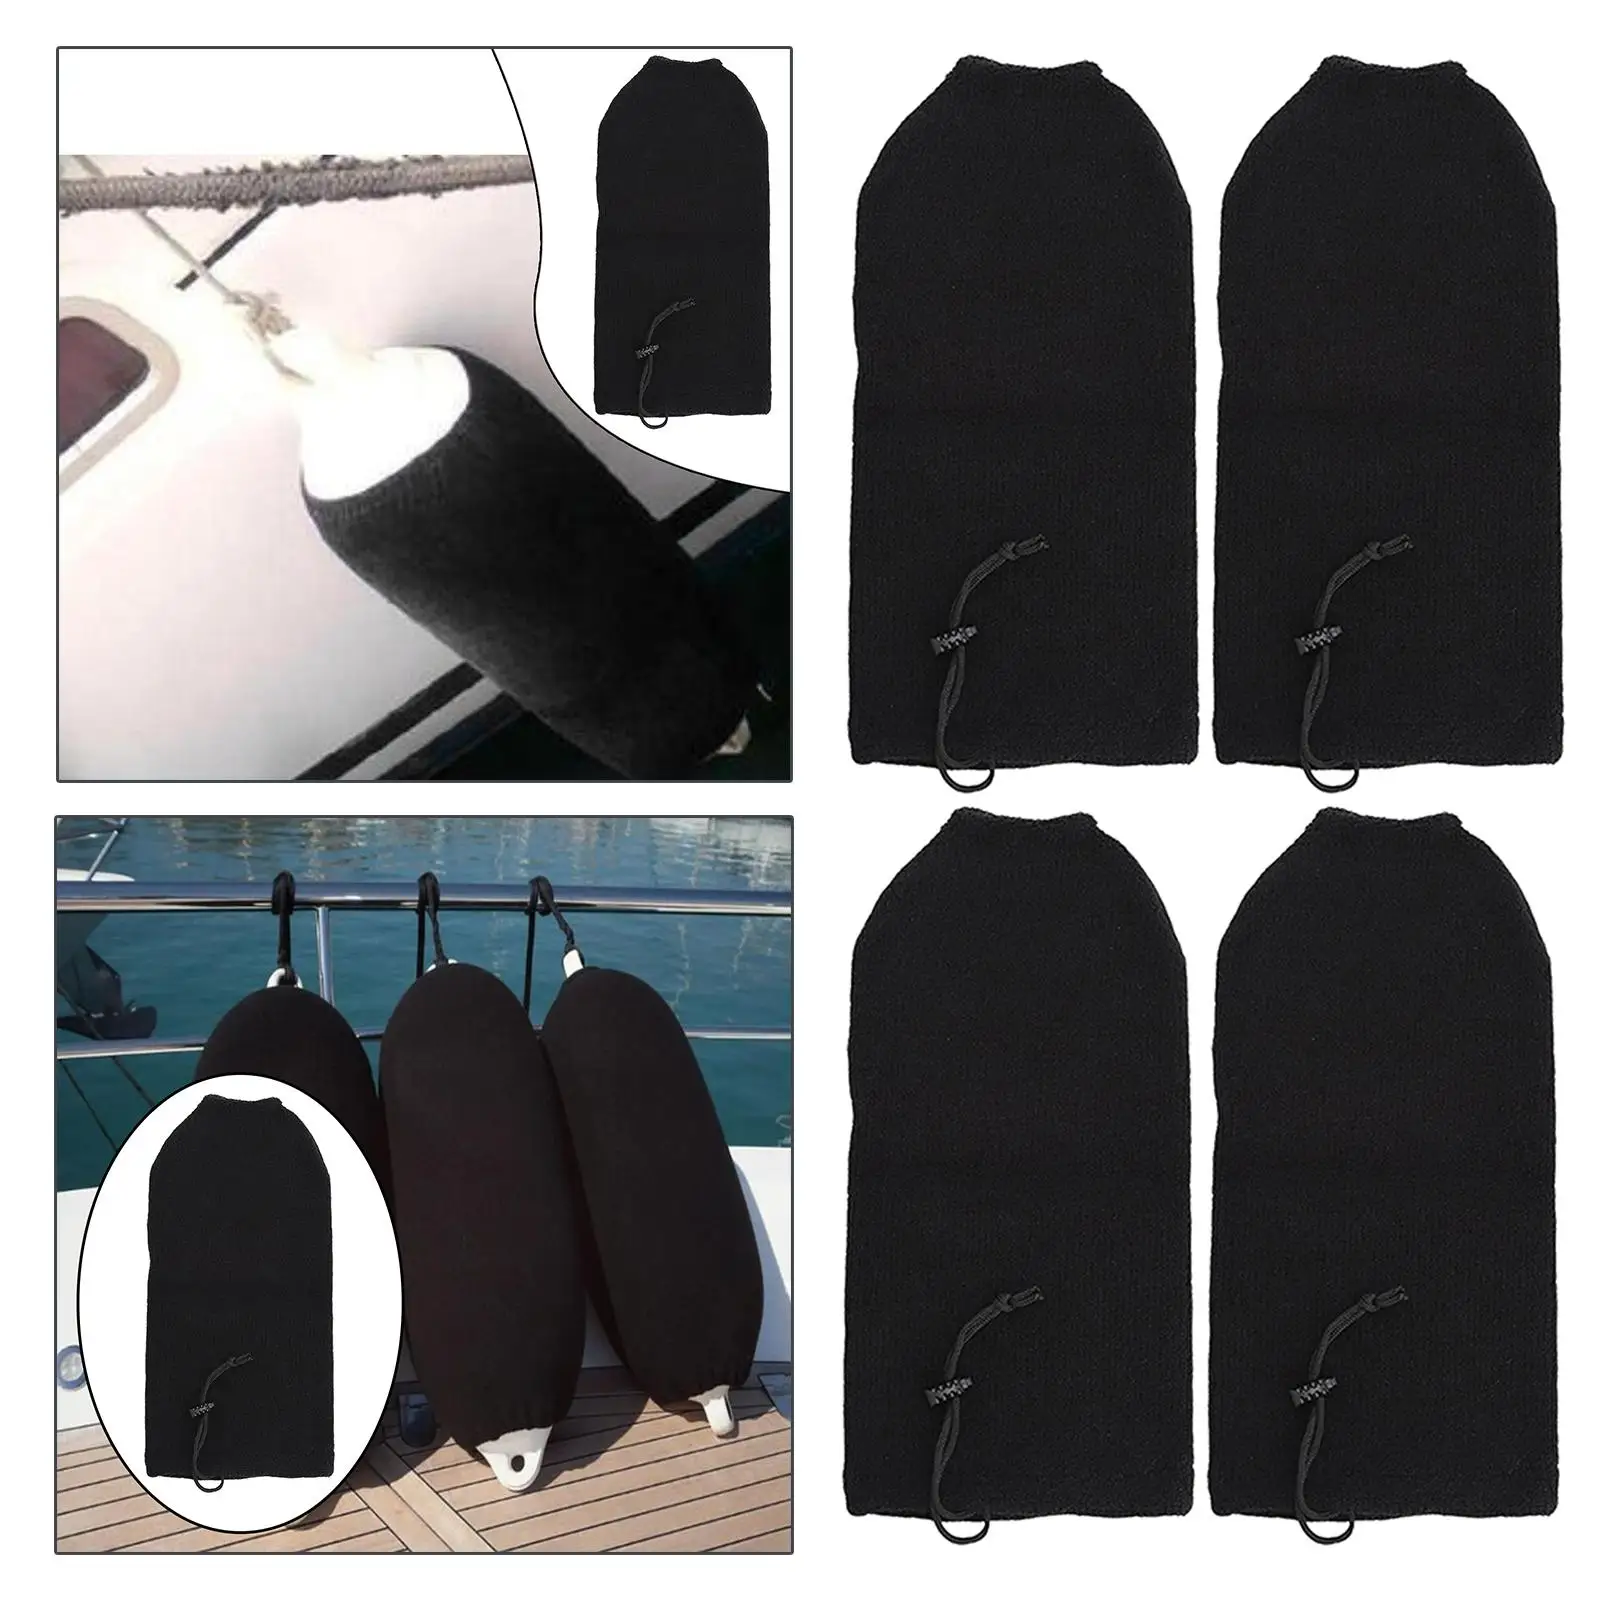 4x Boat Mudguard Covers Soft Woven Anti Collision Black Protector Fit for Marine